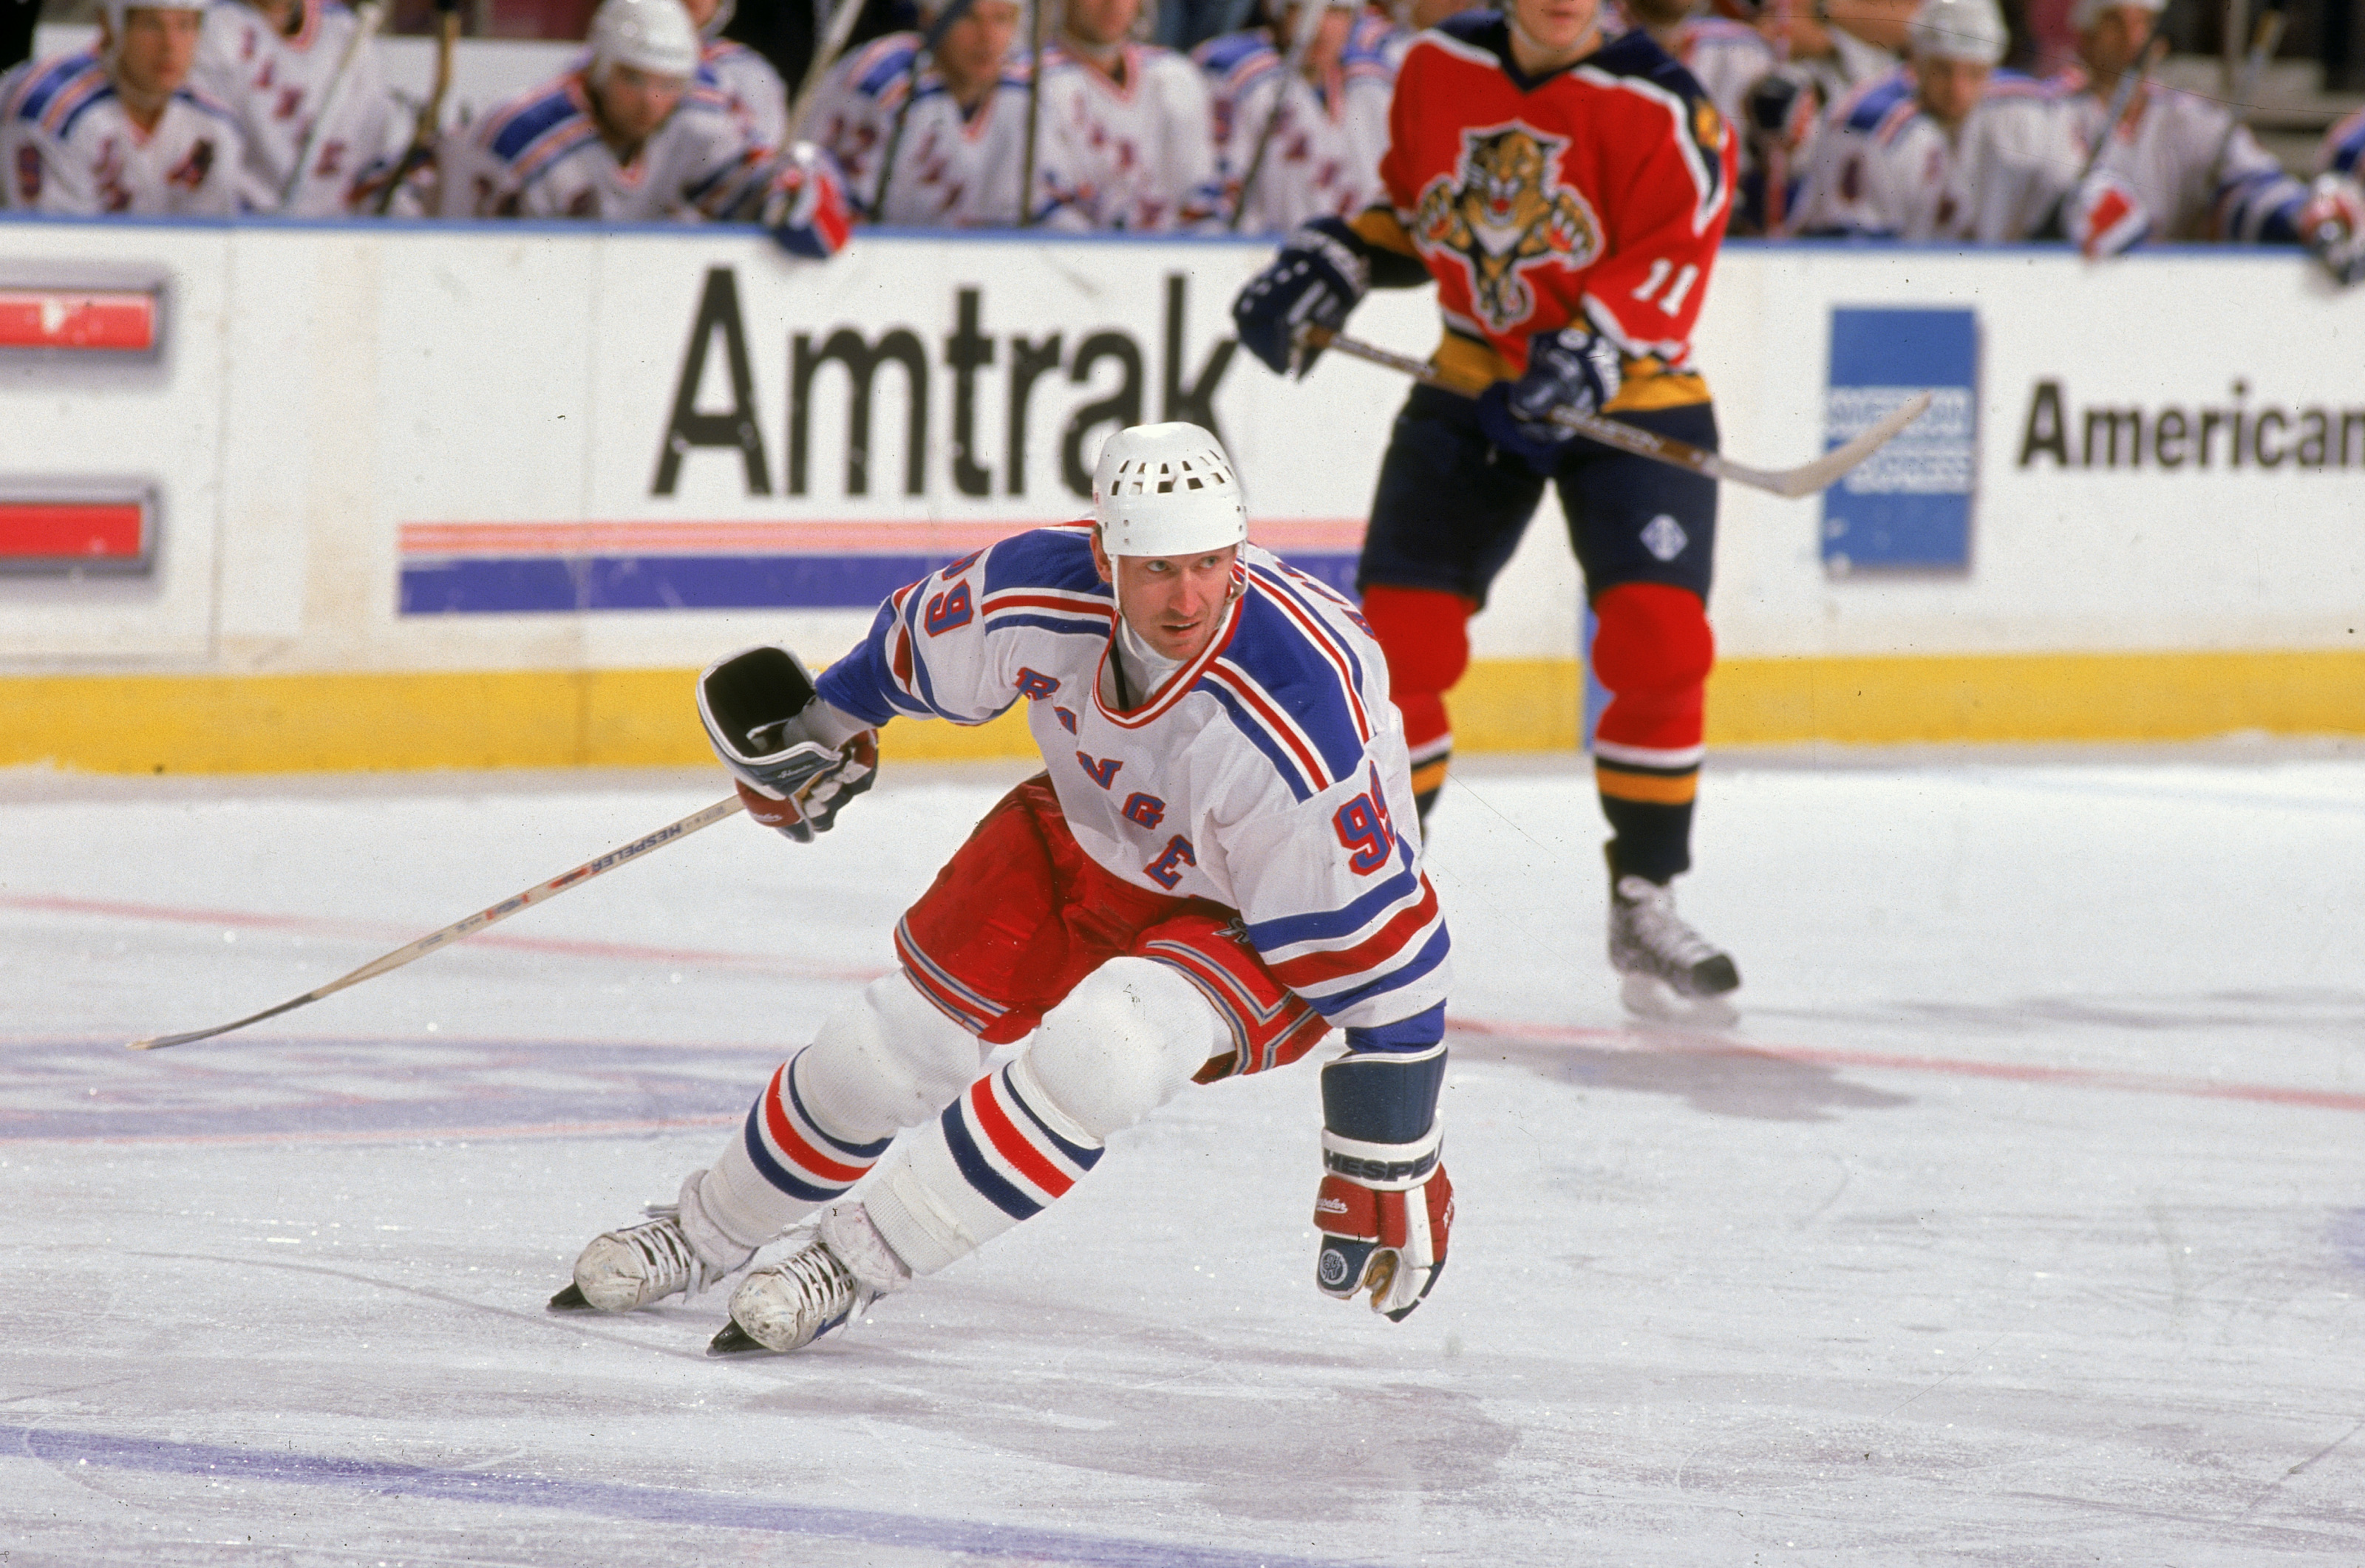 Pavel Bure of the Florida Panthers skates on the ice during an NHL News  Photo - Getty Images